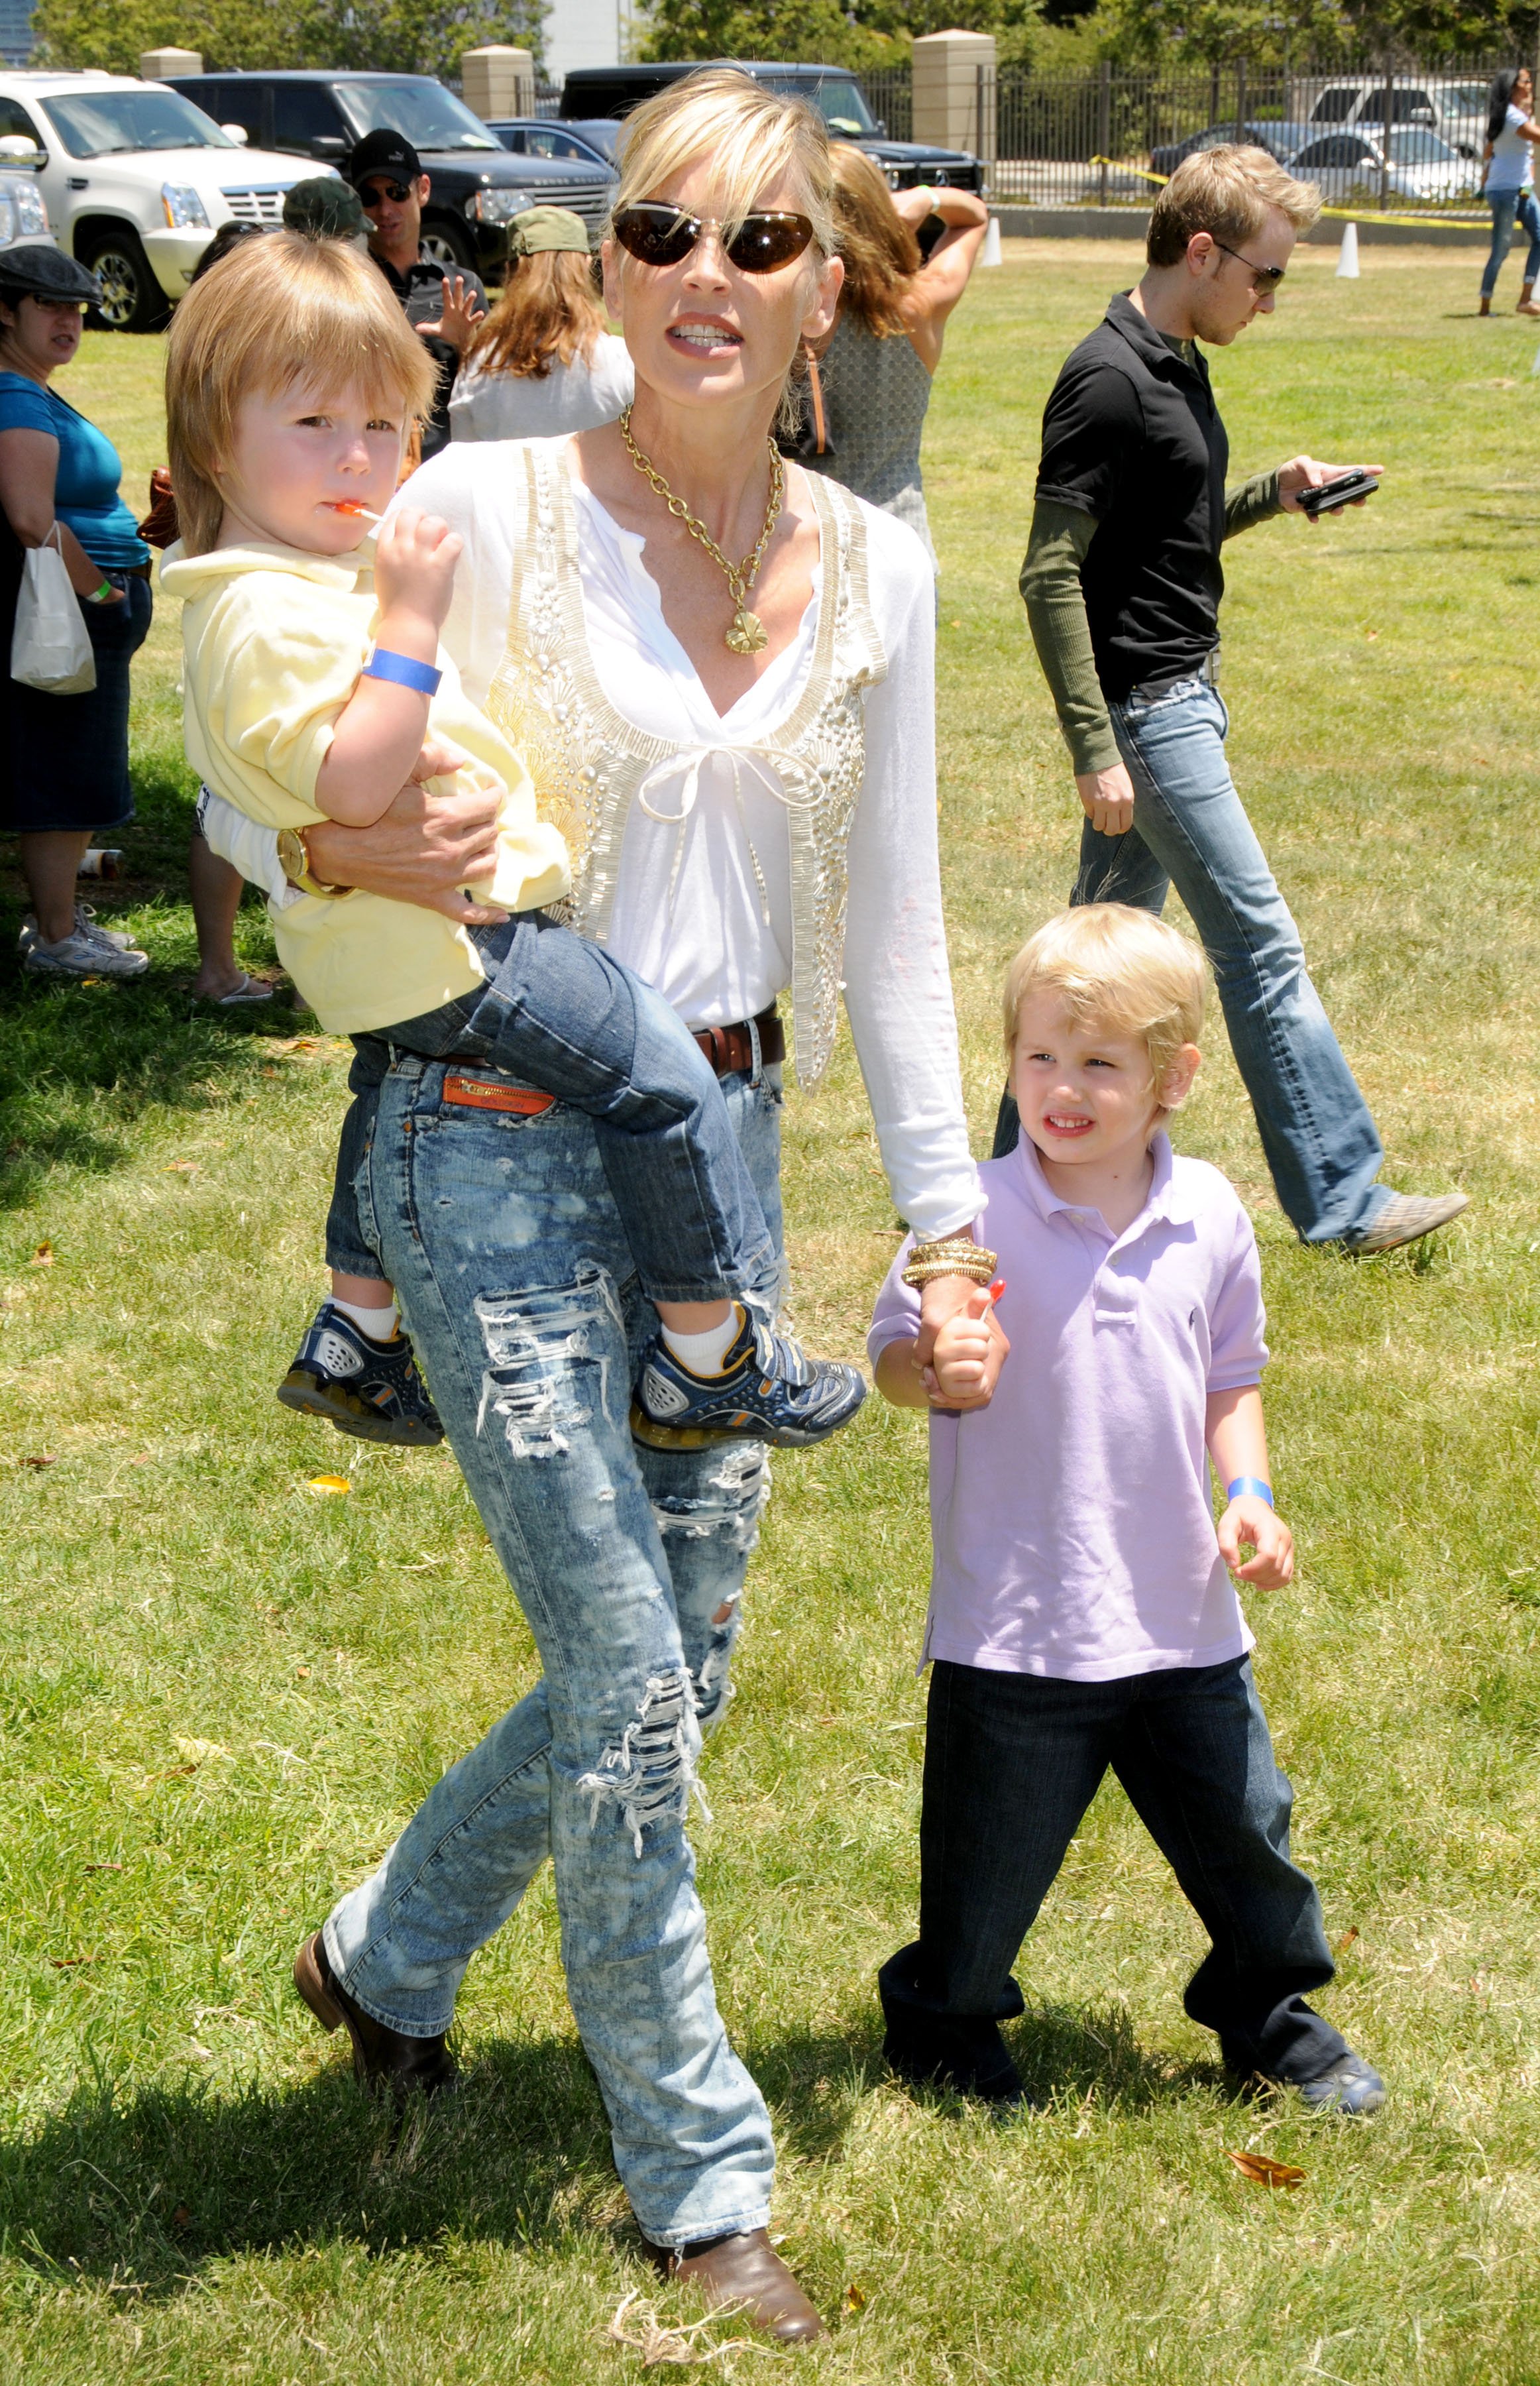 Sharon Stone and sons Quinn and Laird at the 20th Anniversary "A Time For Heroes" Celebrity Carnival on June 7, 2009. | Photo: Getty Images